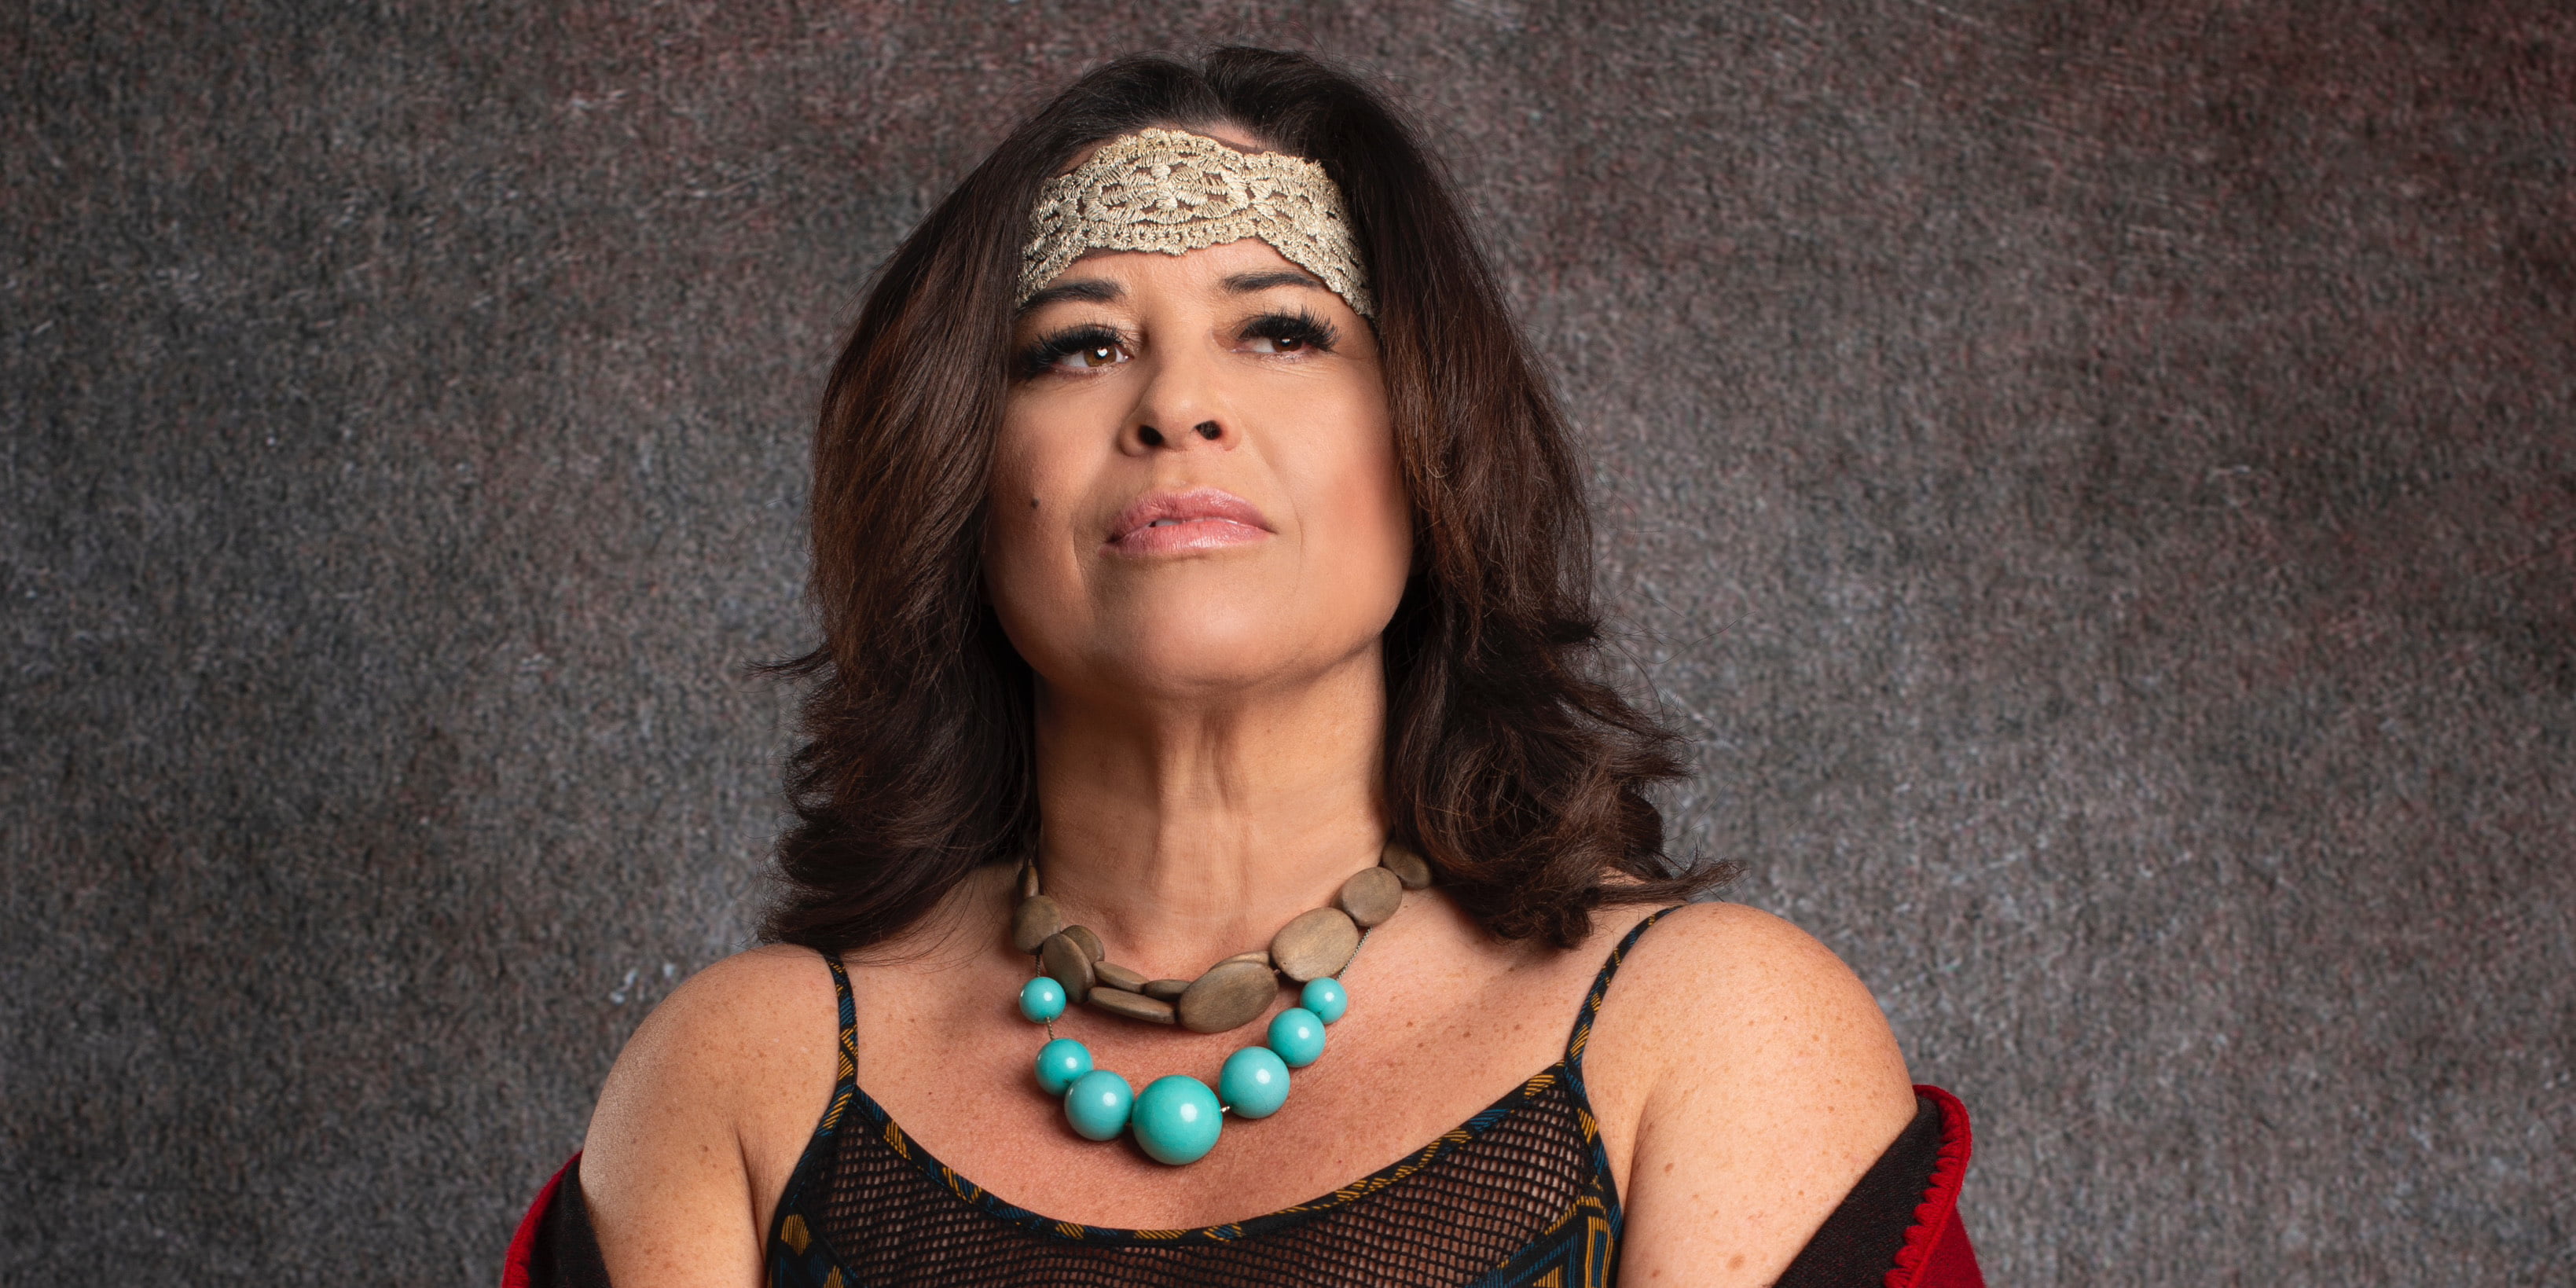 Jacqueline Biollo is of Ojibwe ancestry. She works with Indigenous communities and leadership to foster and maintain relationships between governments, organizations, and Indigenous communities.